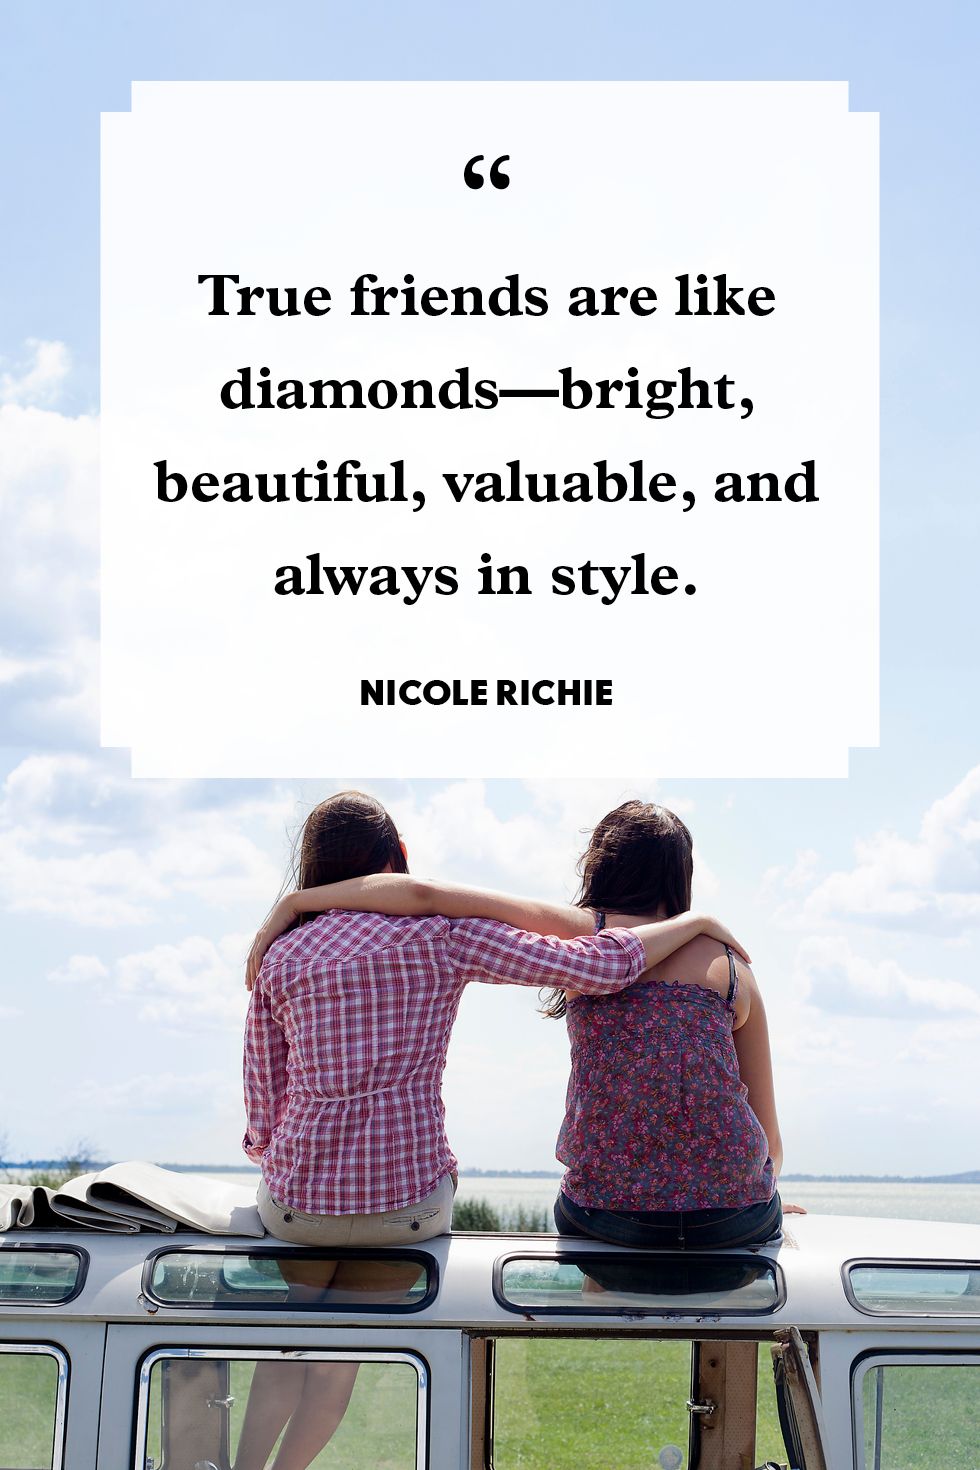 Astonishing Compilation of 999+ Friendship Quotes Images in Full 4K